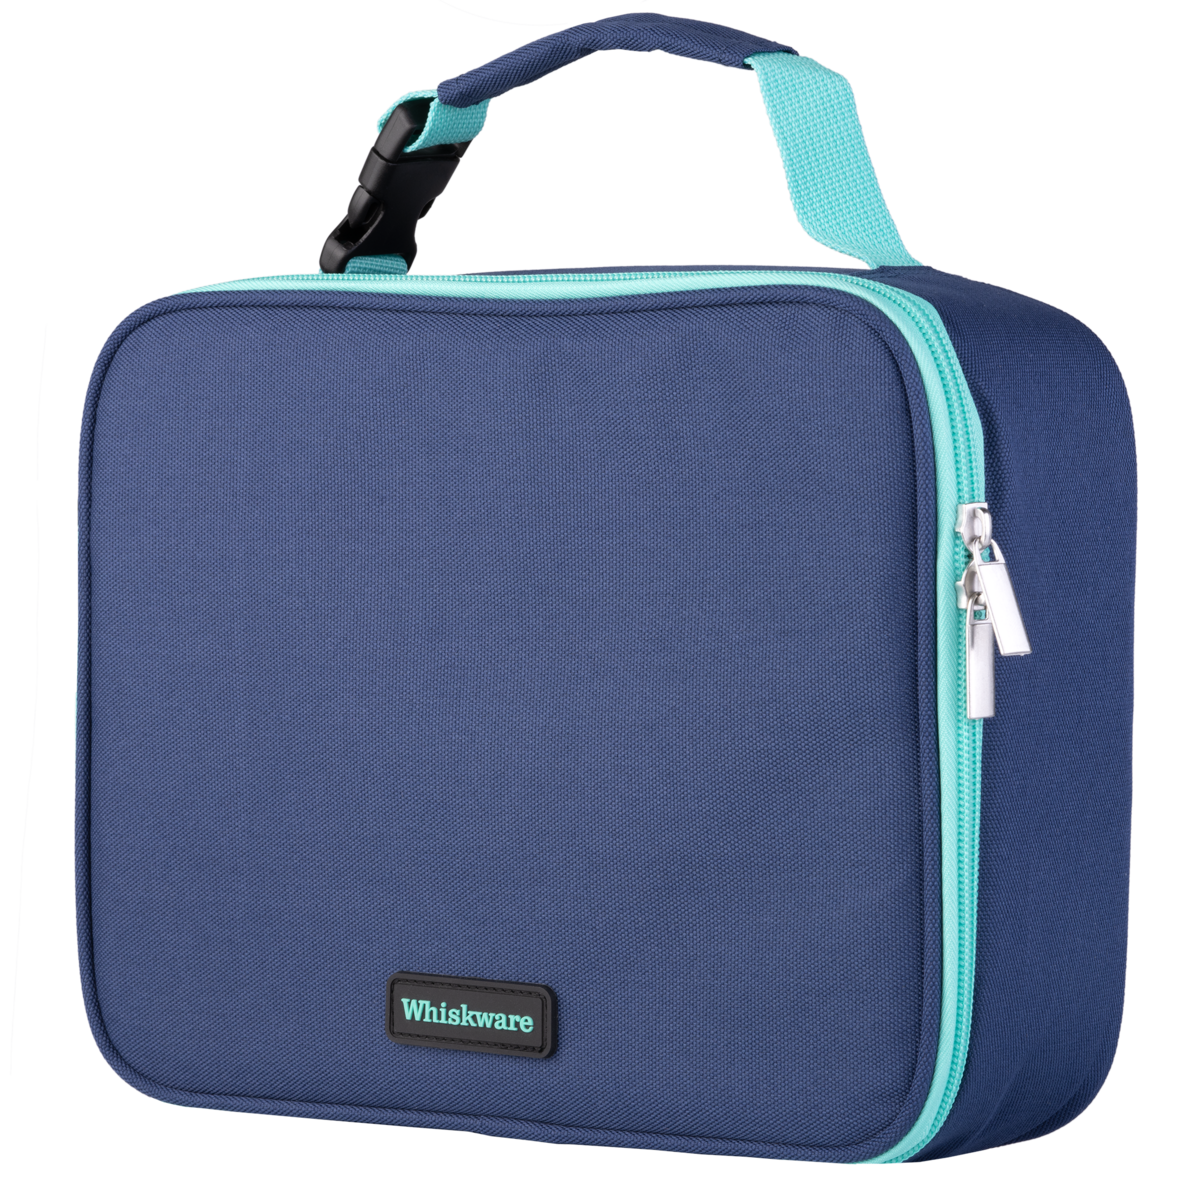 Insulated Lunch Box - Insulated Lunch Box Manufacturer